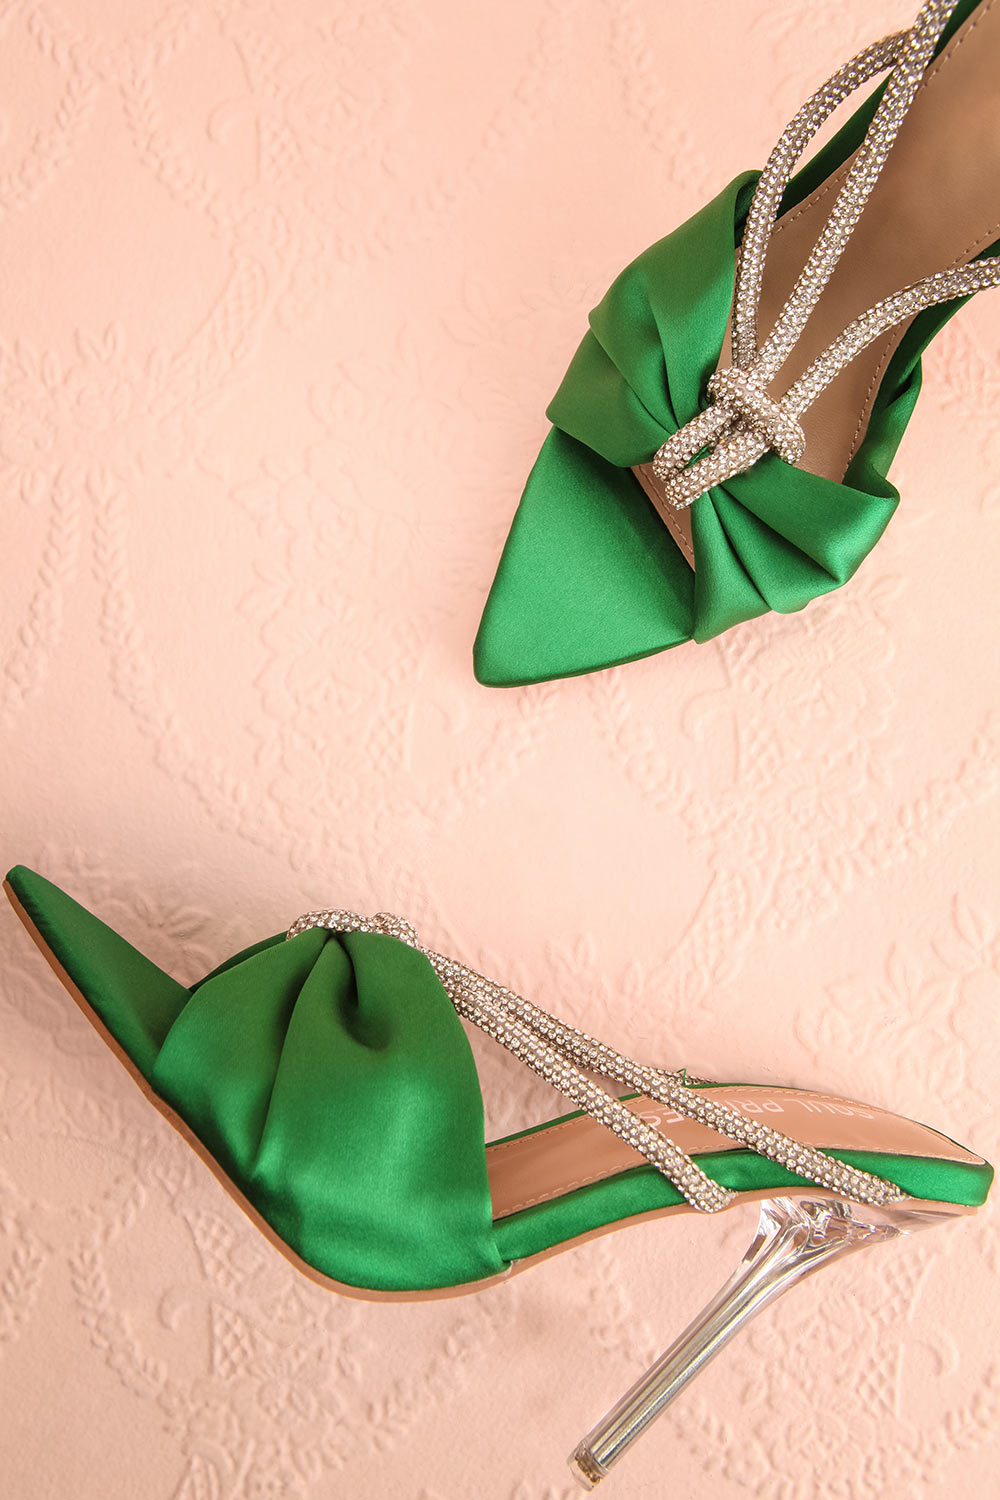 Chamaeleon Green Pointed-Toe Heels w/ Sequin Knot | Boutique 1861 flat view